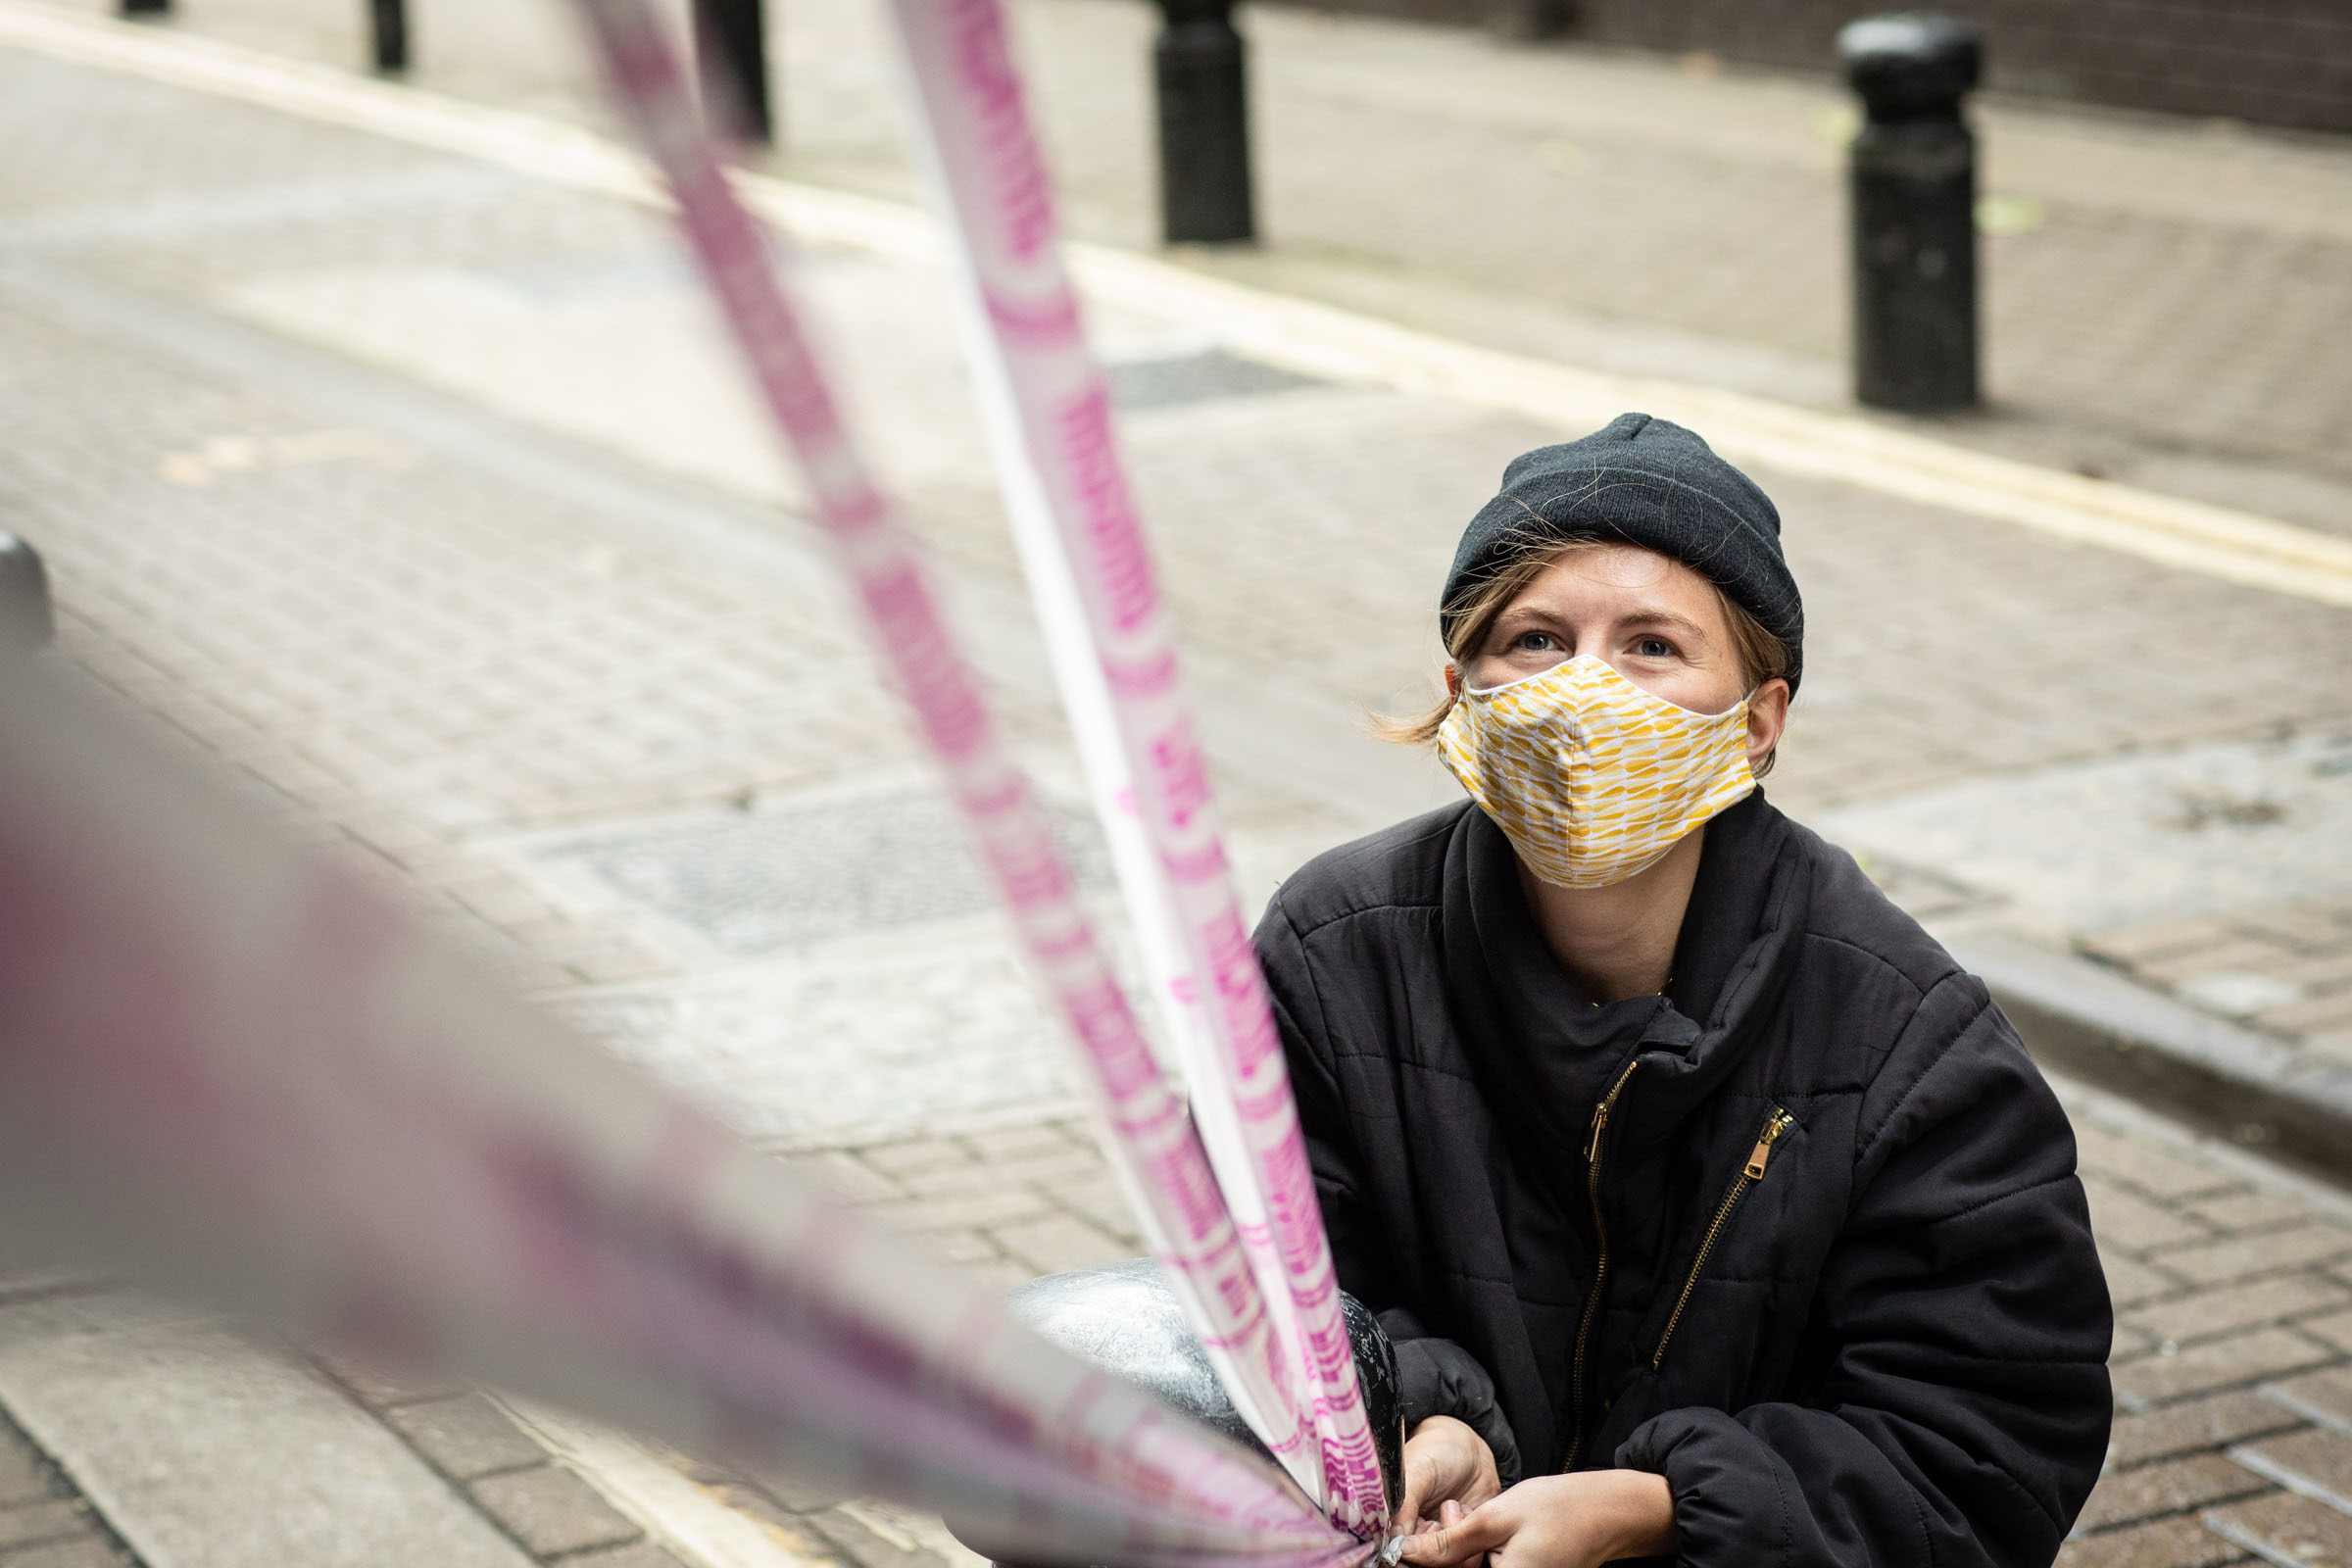 Designer Rosanna Vize outside the Phoenix Theatre with her facemask on